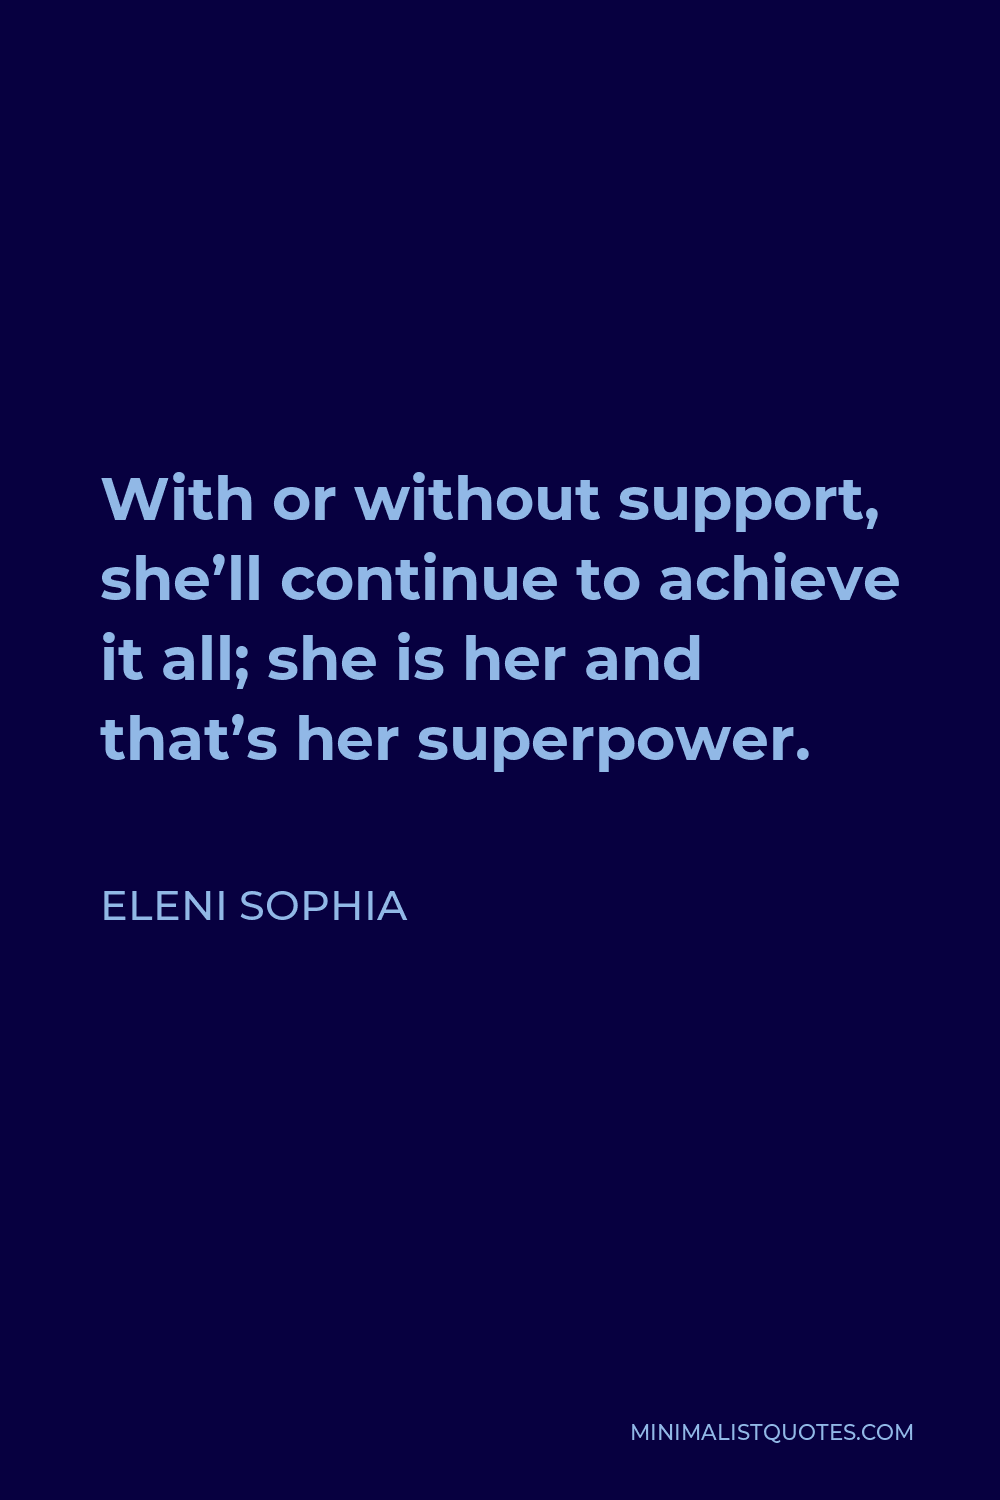 Eleni Sophia Quote - With or without support, she’ll continue to achieve it all; she is her and that’s her superpower.